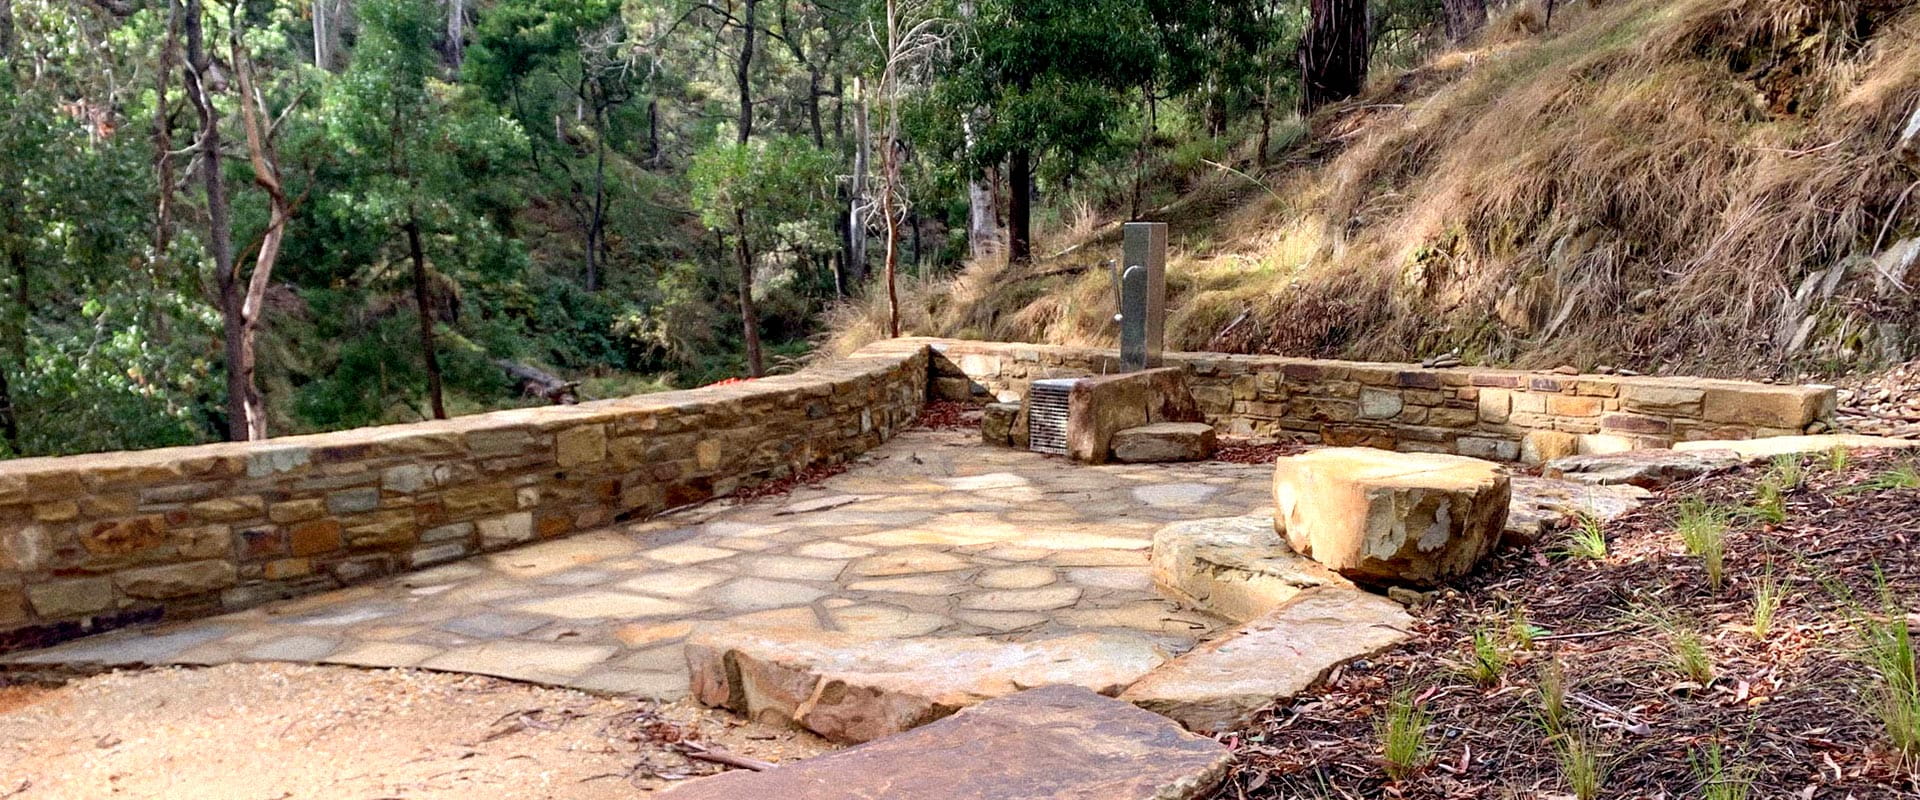 A mineral spring fountain surrounded by brickwork sits amongst a hilly, rugged bushland.